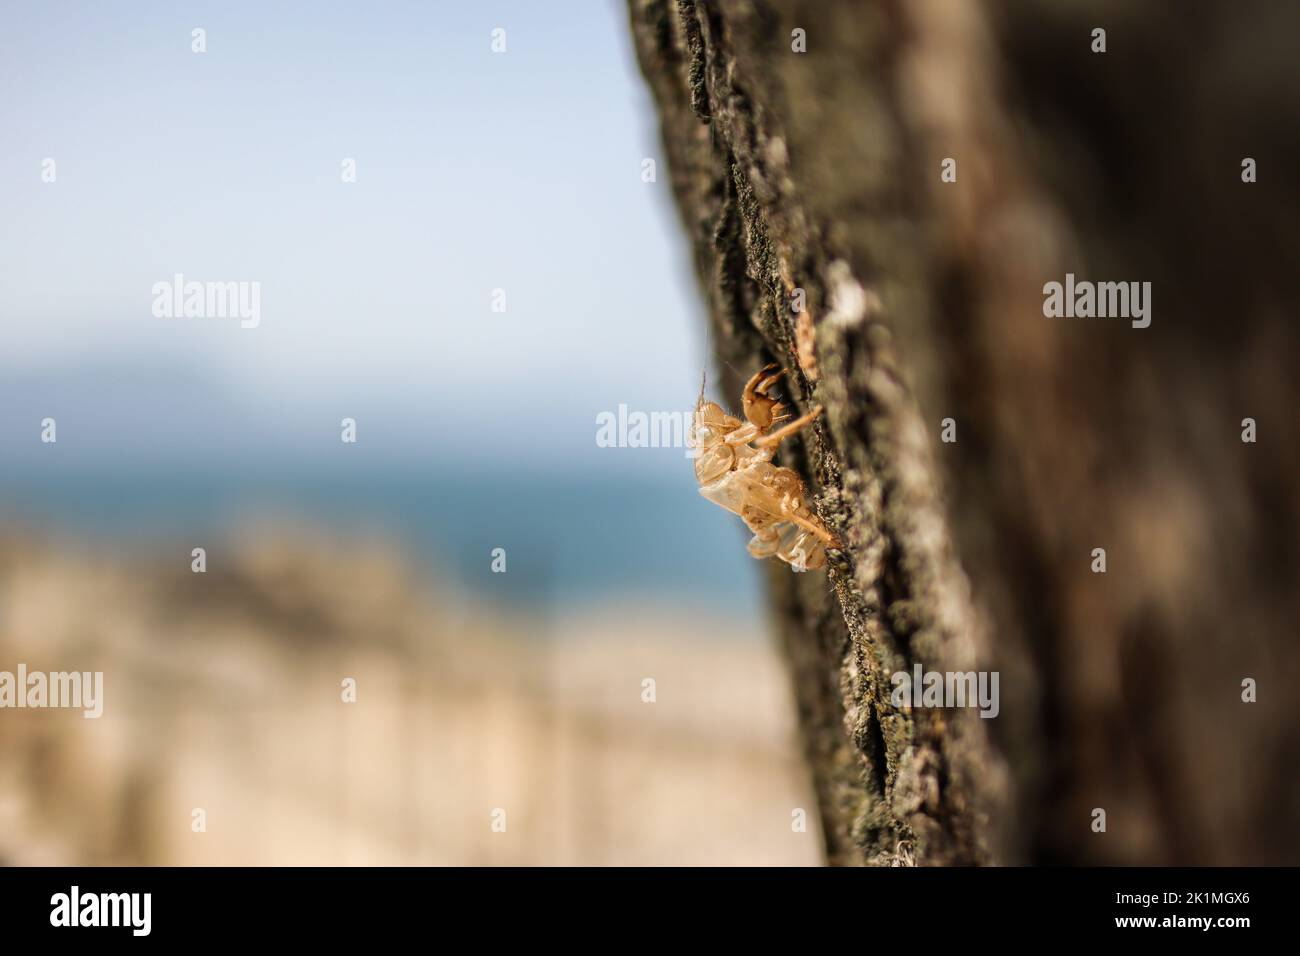 Empty Shell of Insect in Italy. Exoskeleton of Cicada on Tree in Europe during Summer. Stock Photo